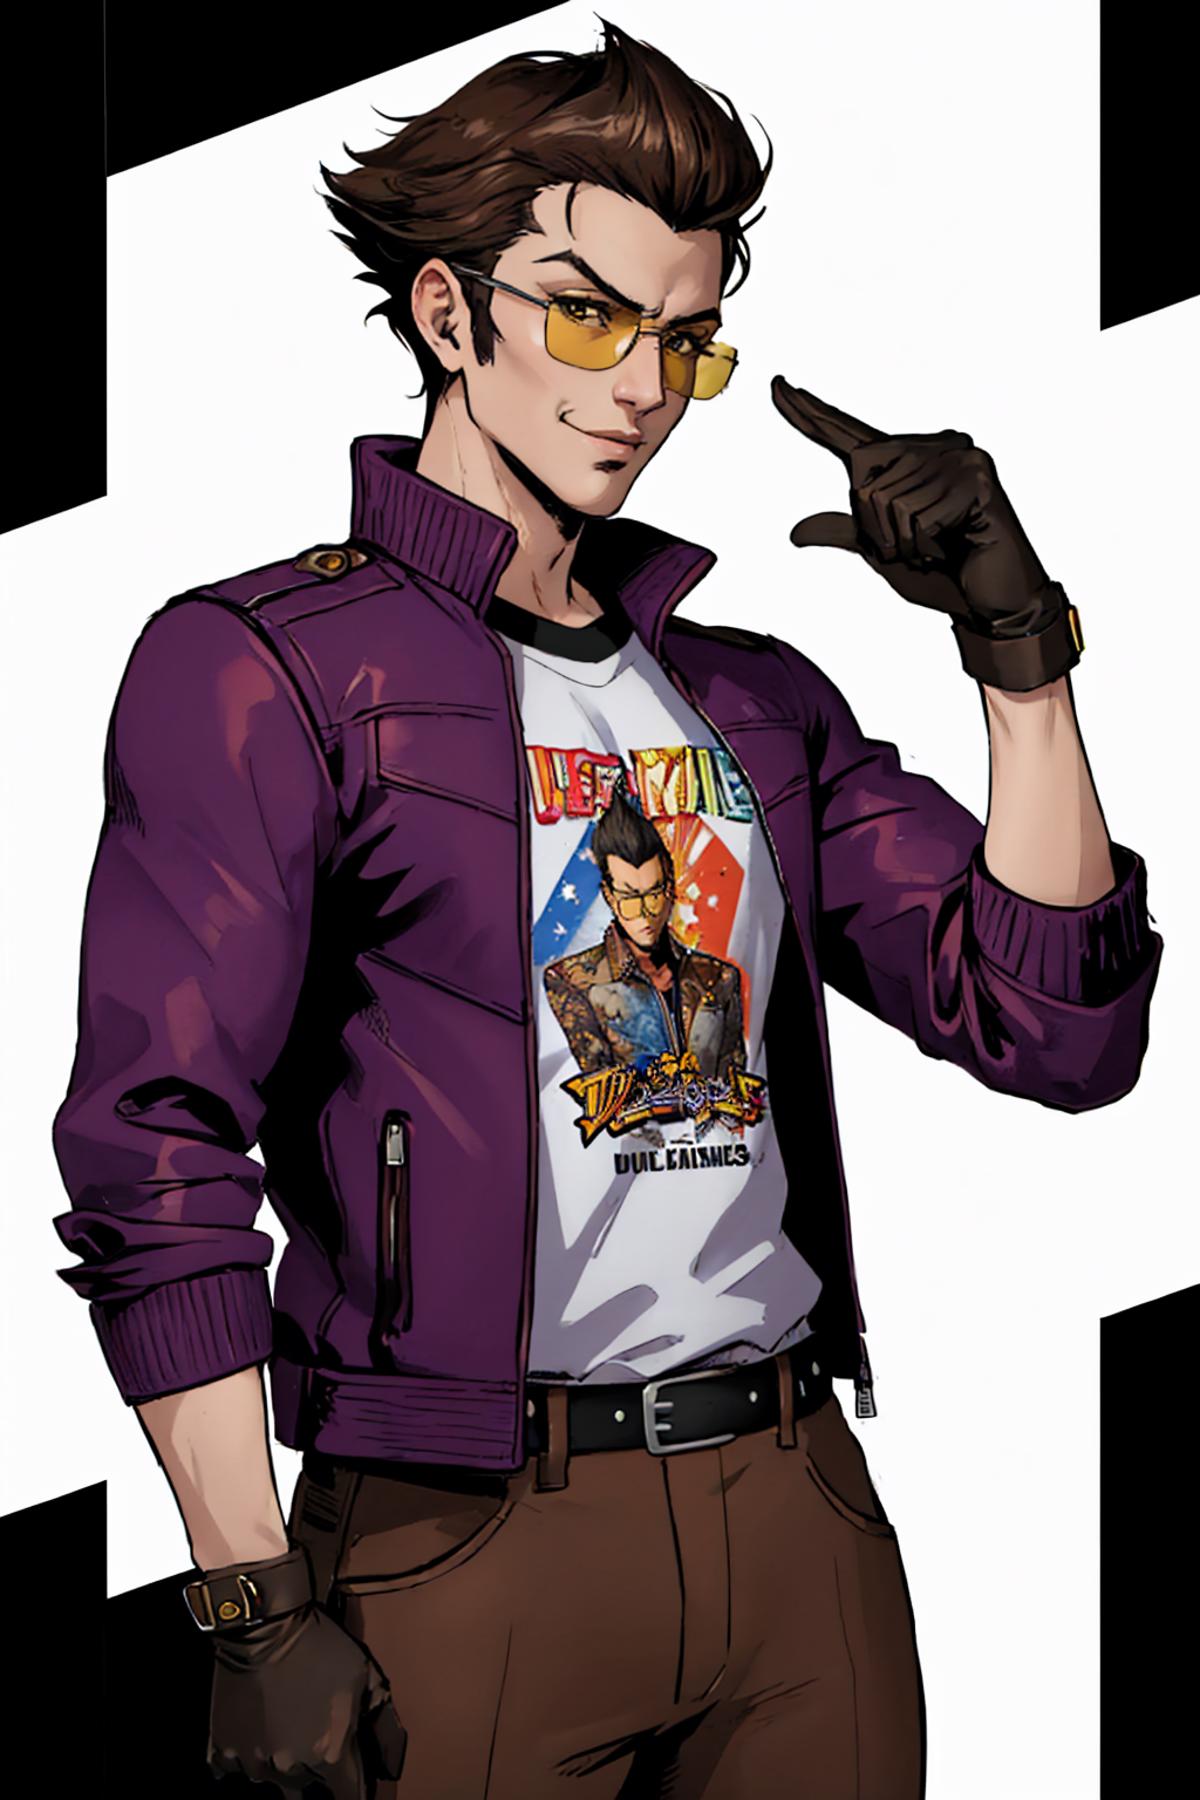 Travis Touchdown | No More Heroes image by justTNP